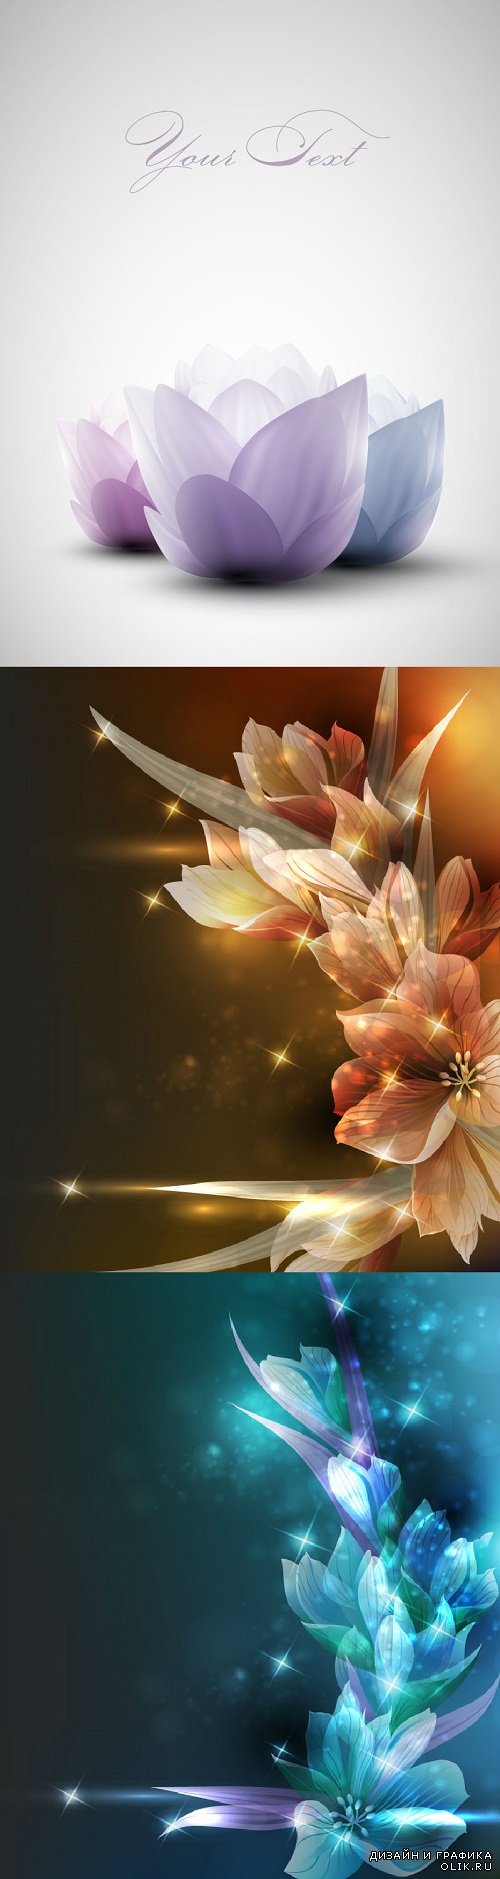 Vector - Beautiful flowers backgrounds